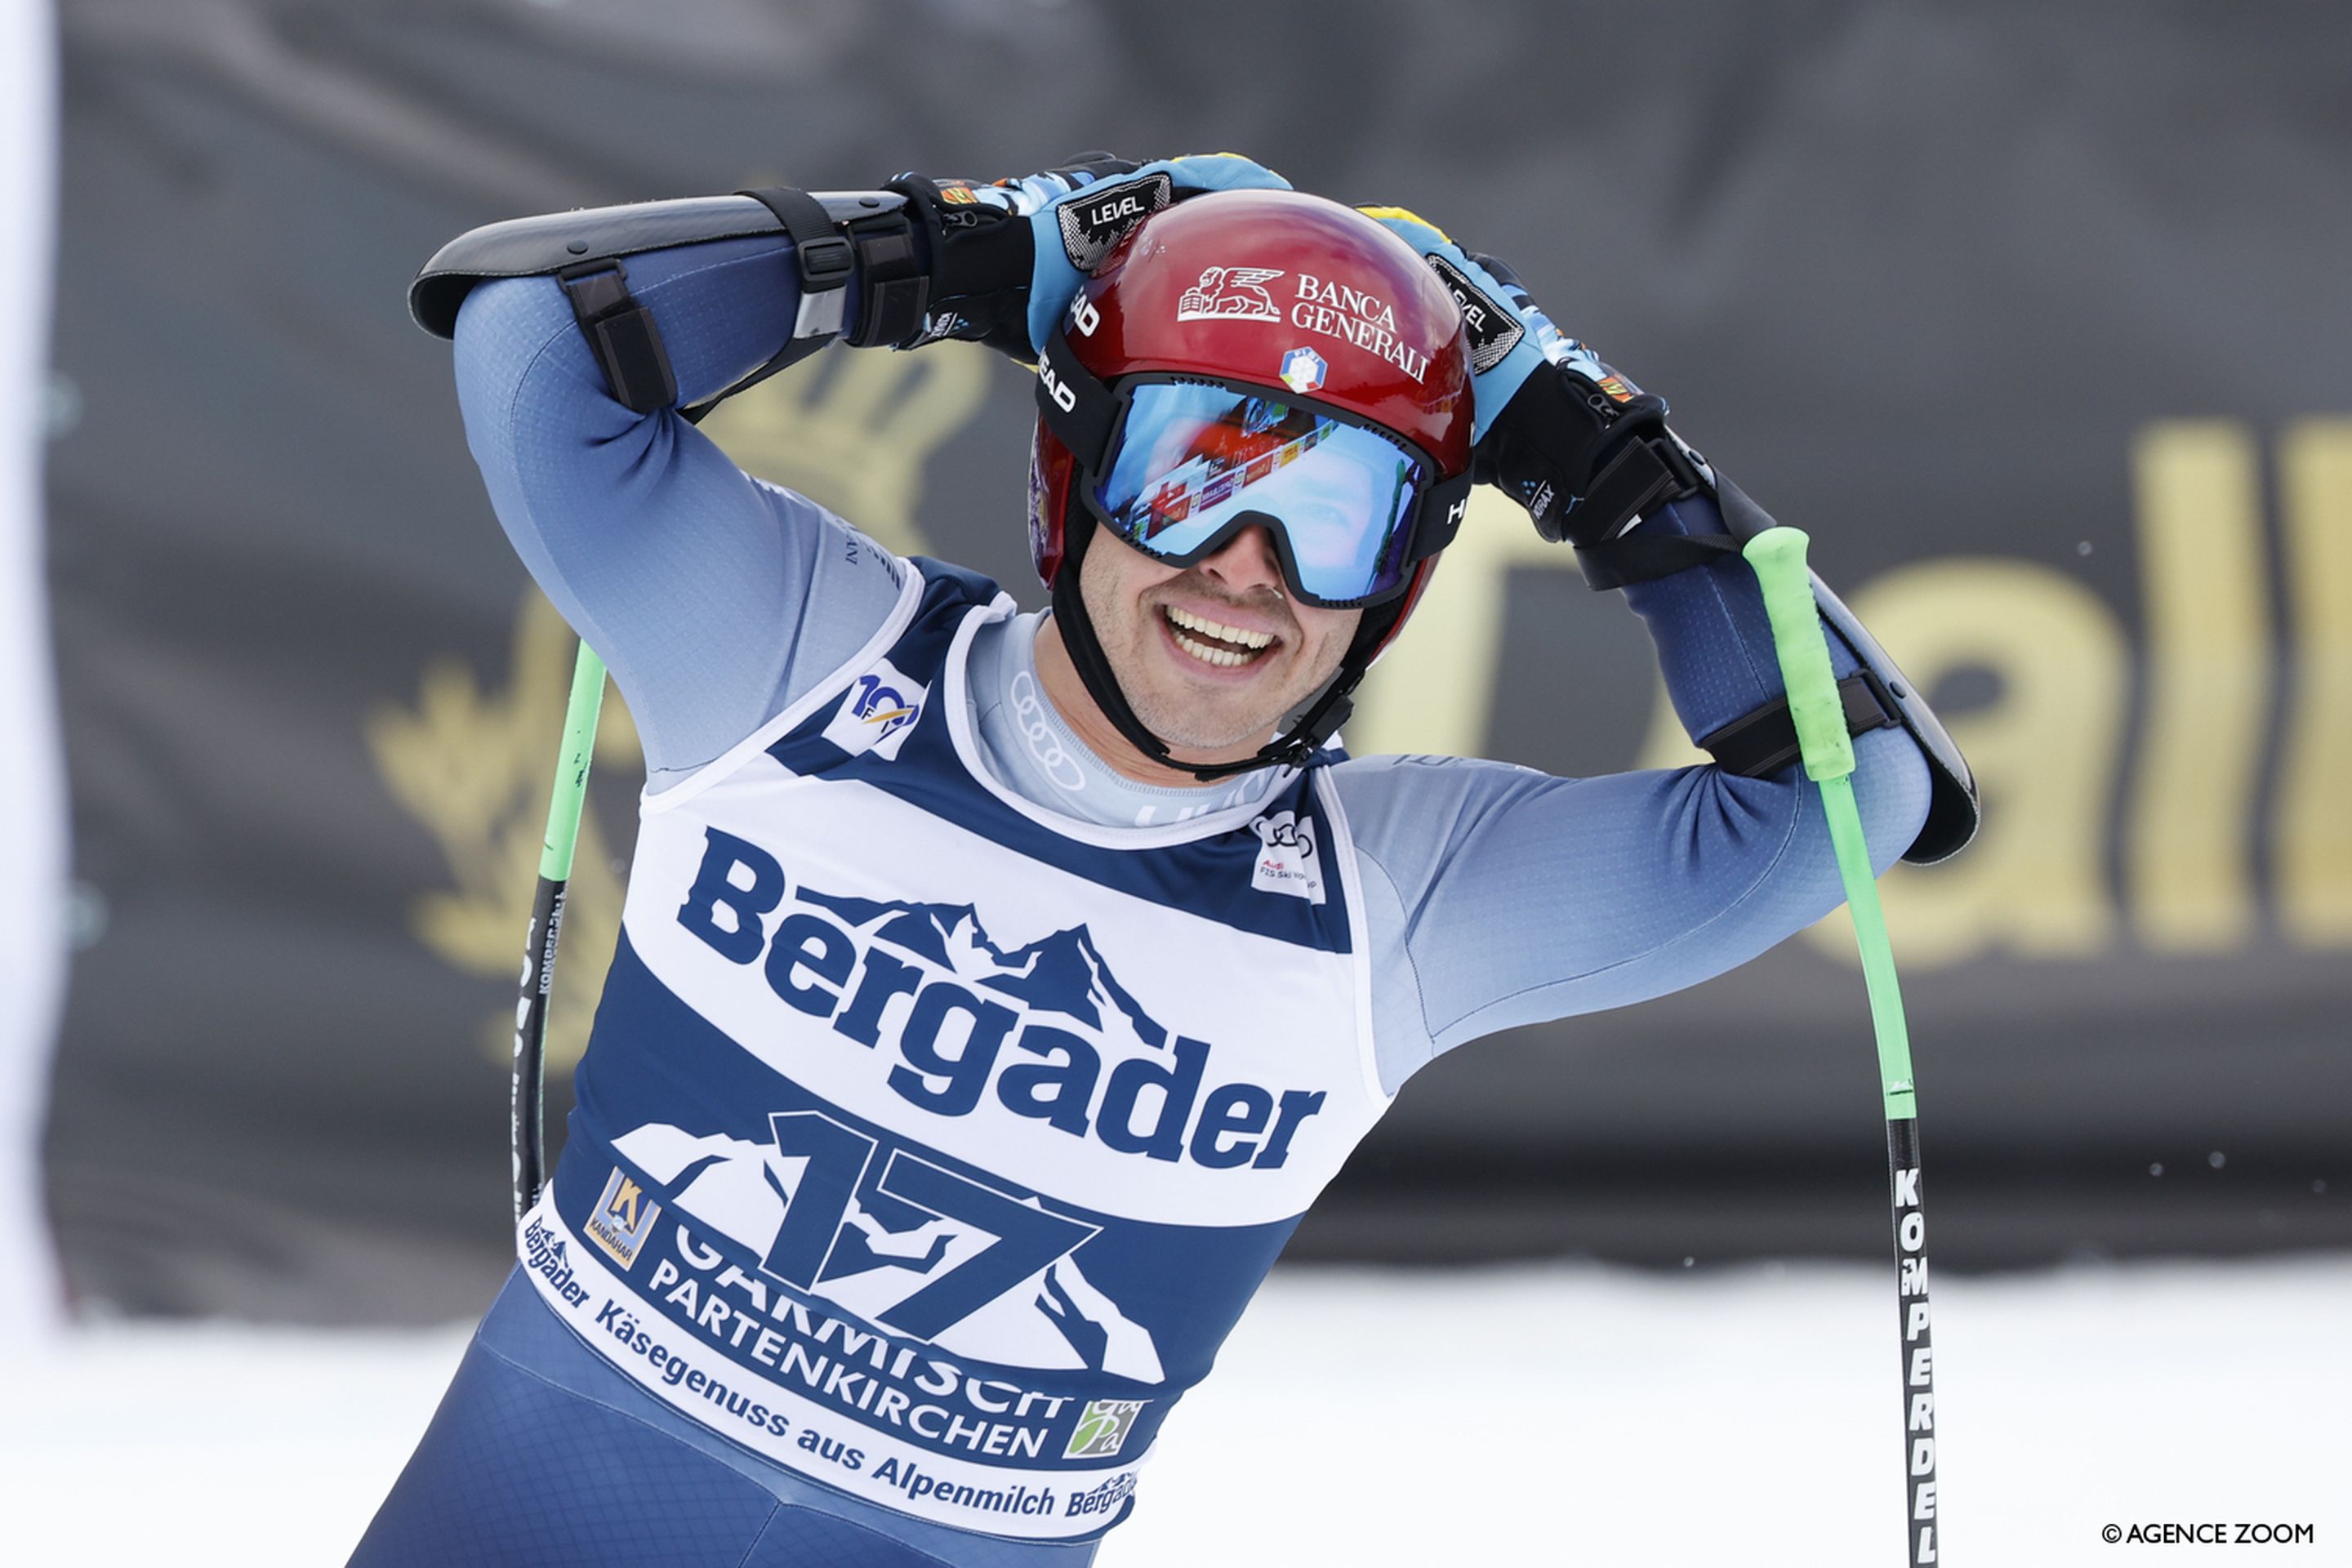 Guglielmo Bosca (ITA) couldn't believe it after he skied into the lead (Agence Zoom)